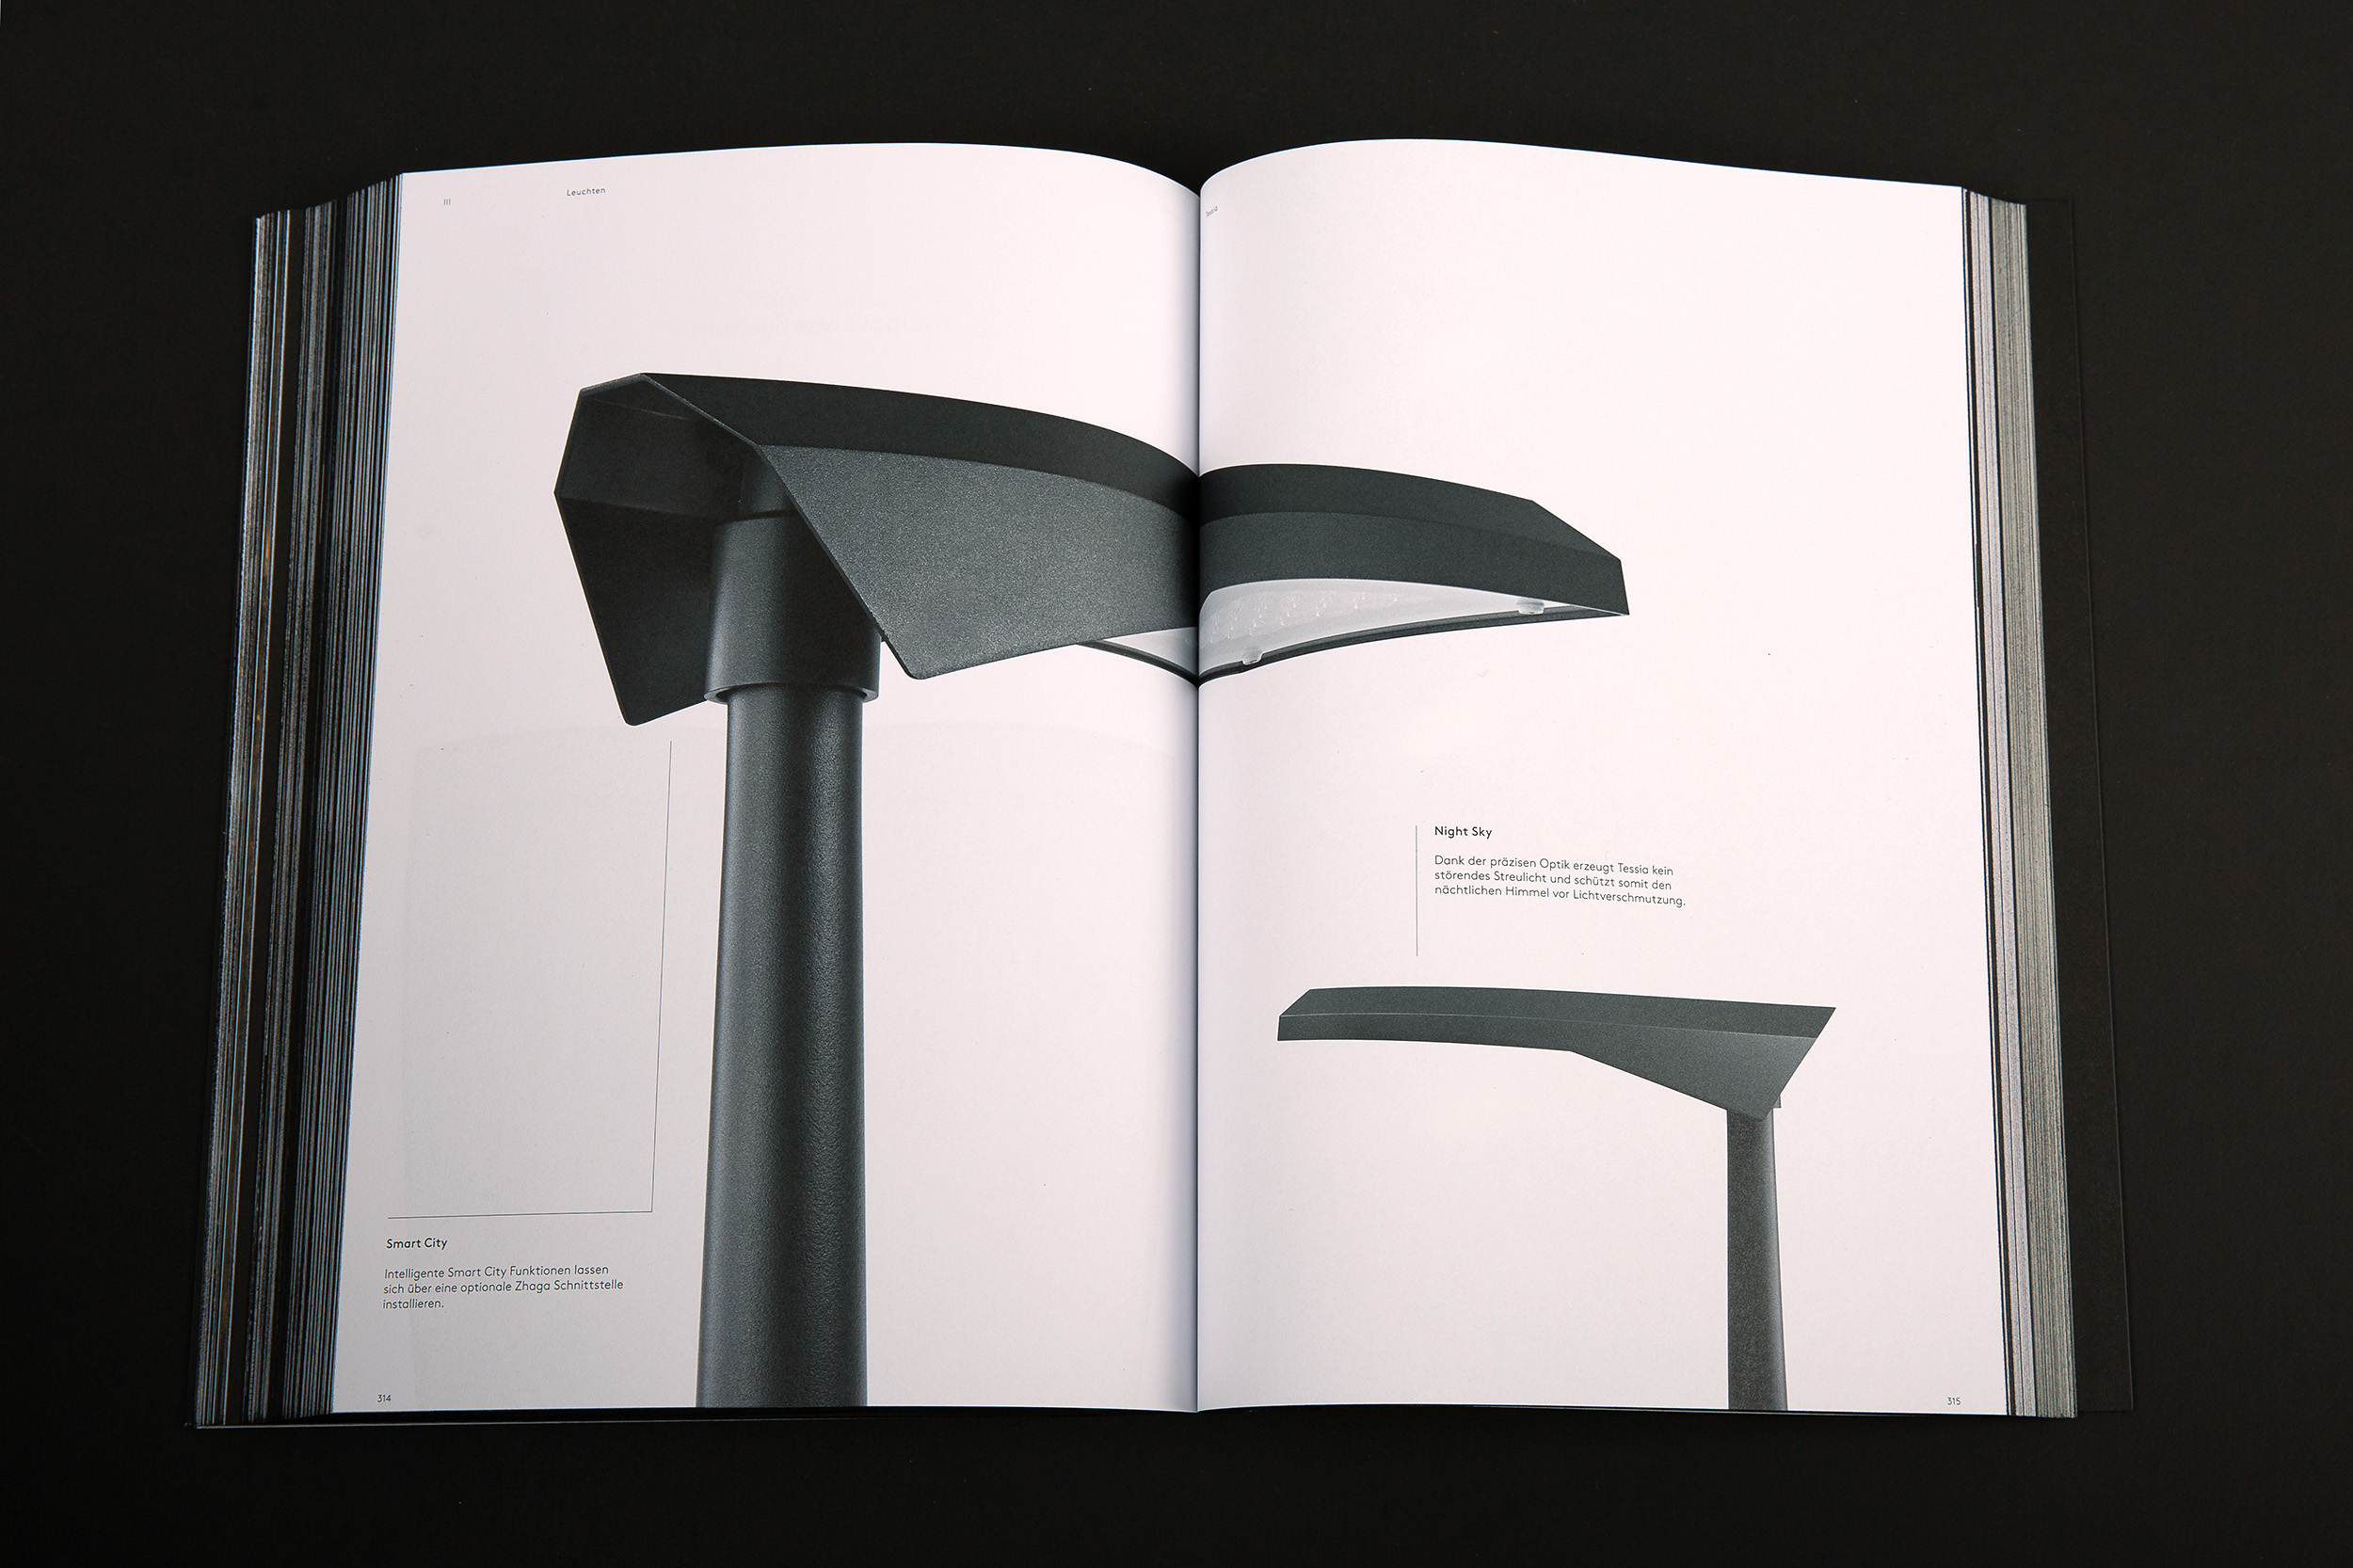 An image of Selux Imagebook, showcasing a double page spread of the Tessia Luminaire with Smart City and Night Sky features against a white background.